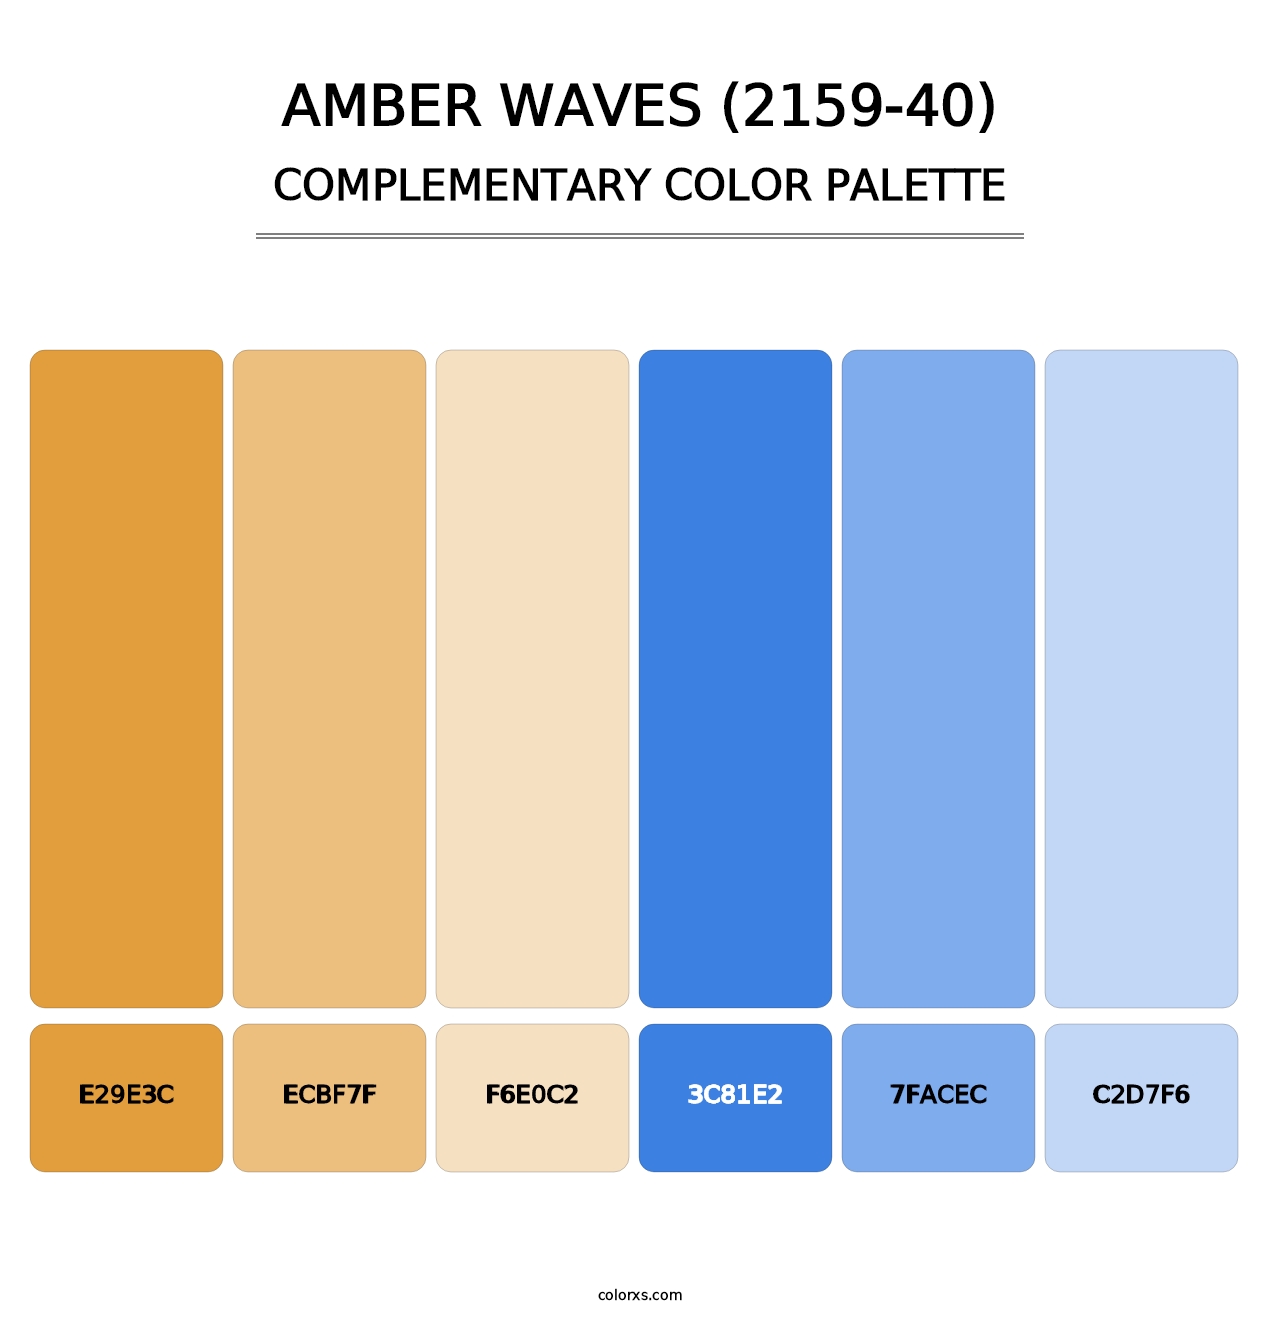 Amber Waves (2159-40) - Complementary Color Palette